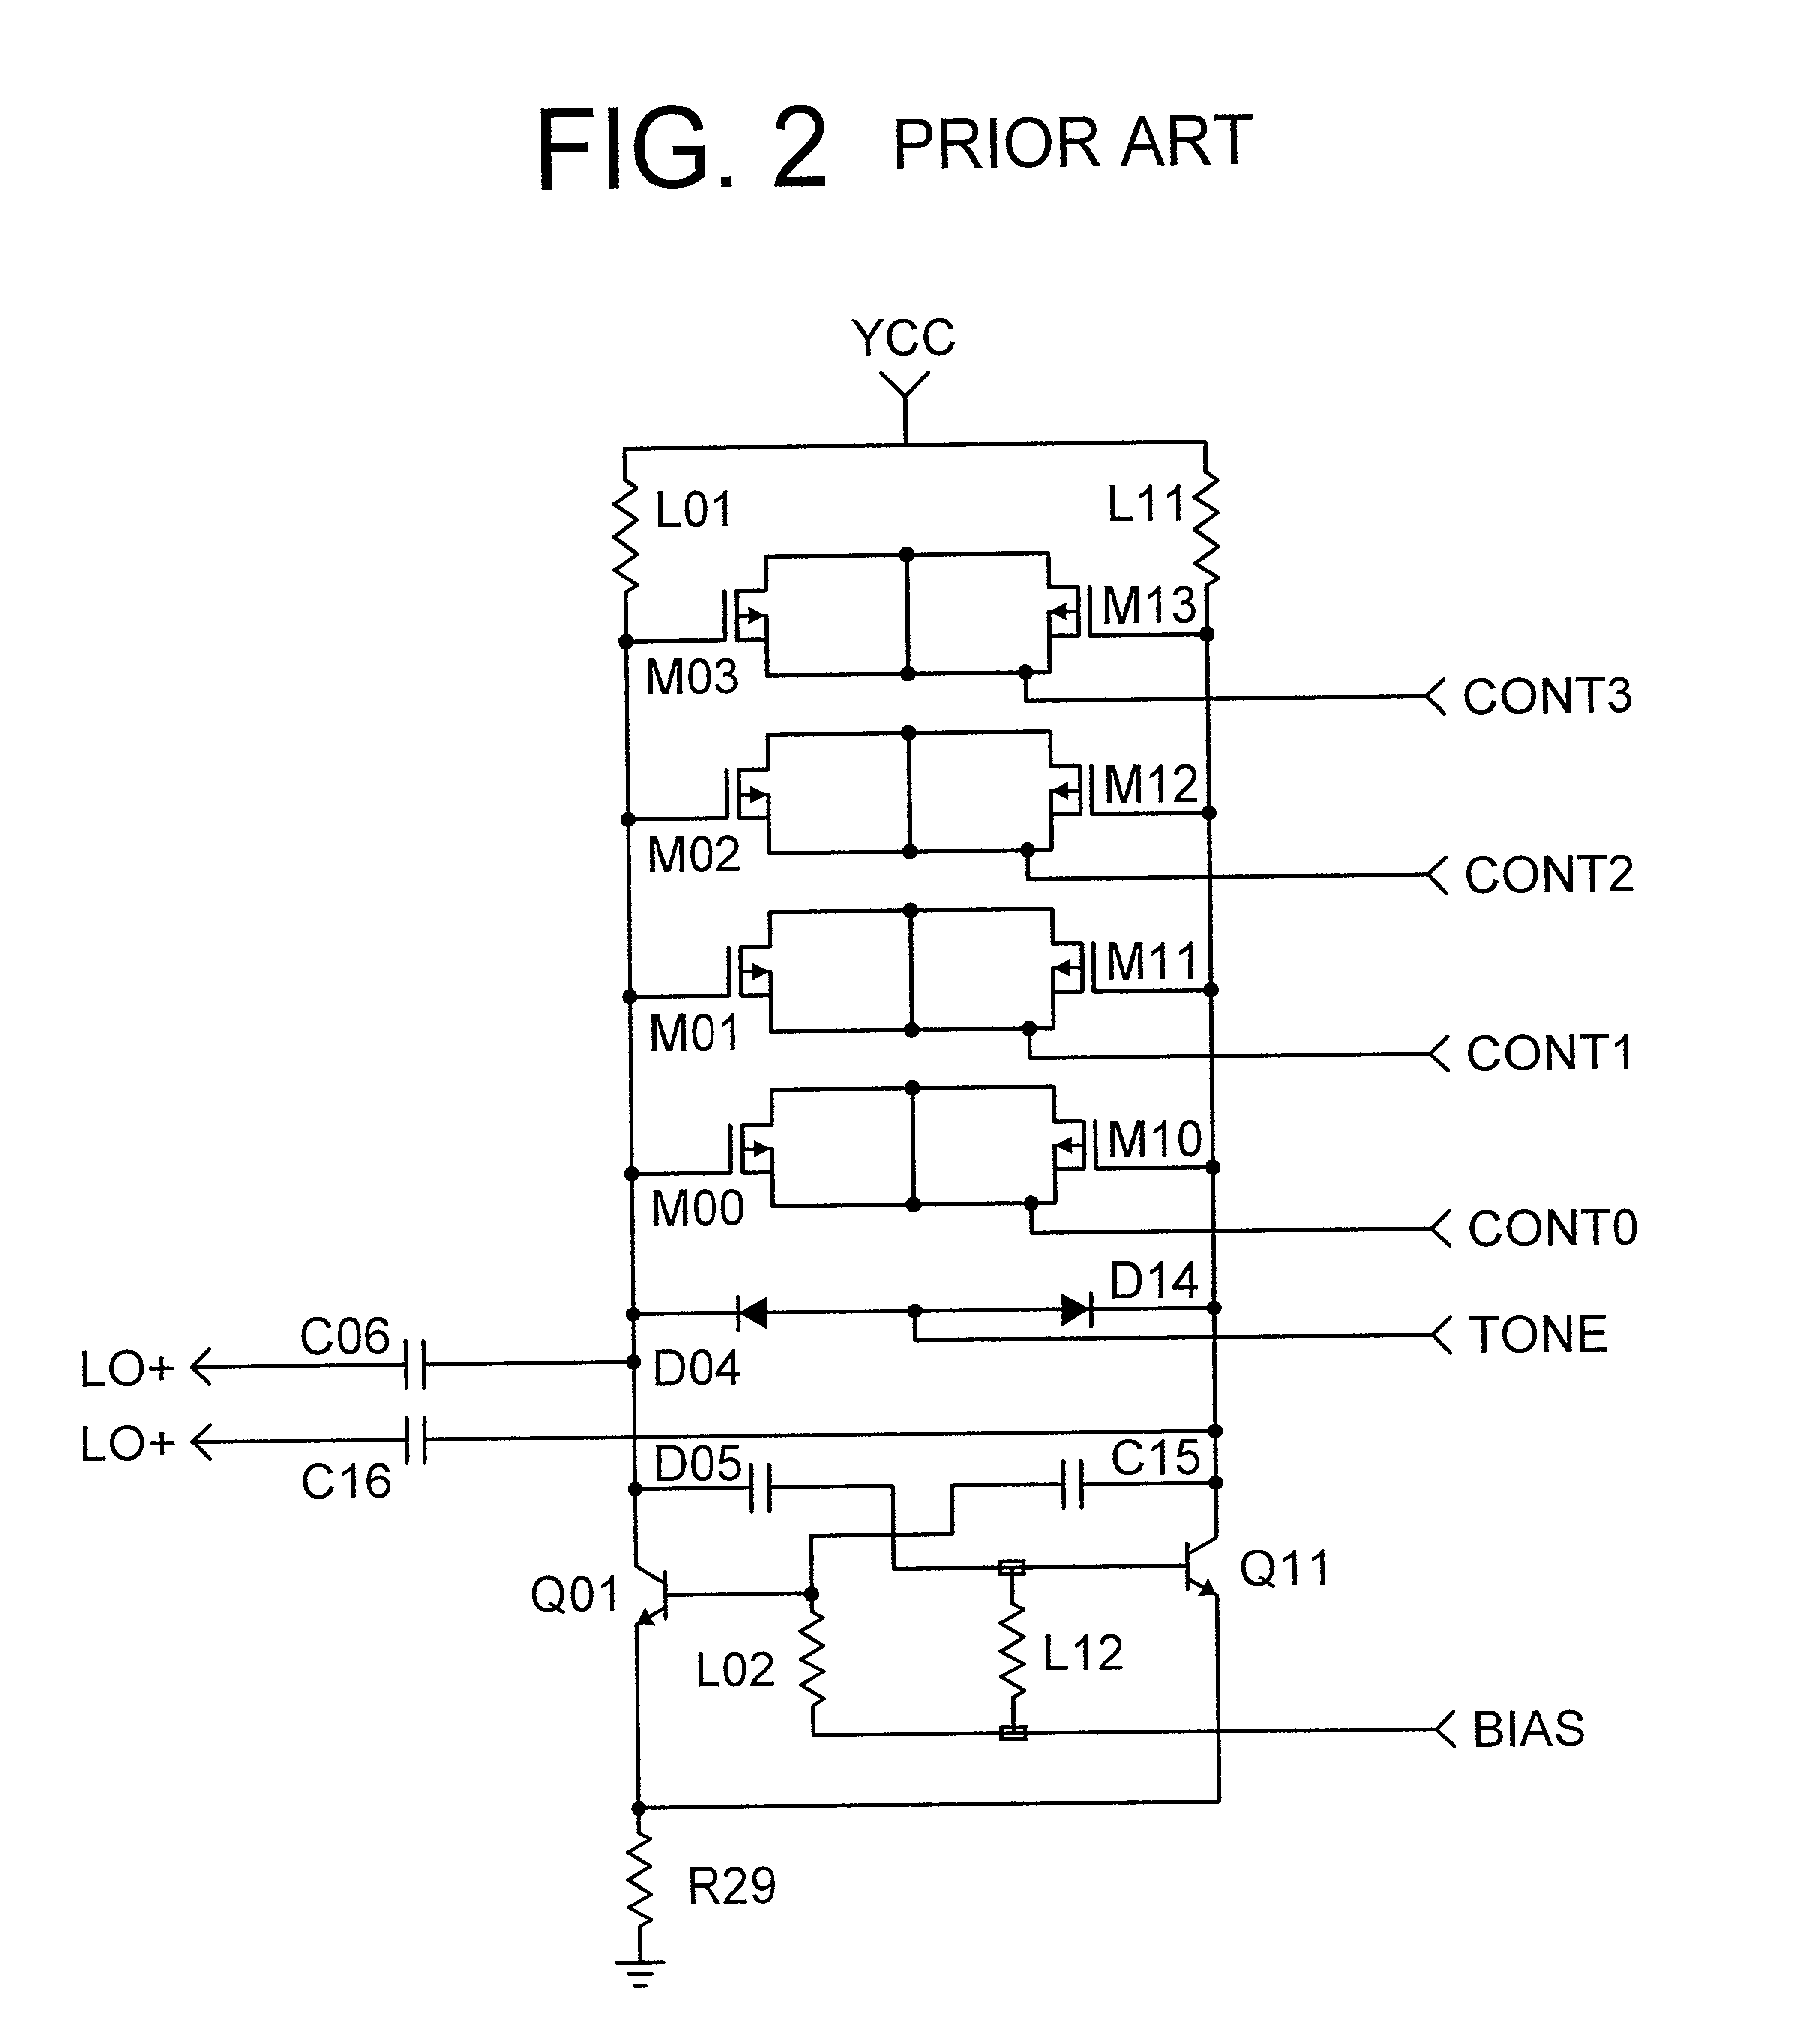 PLL circuit having a variable output frequency